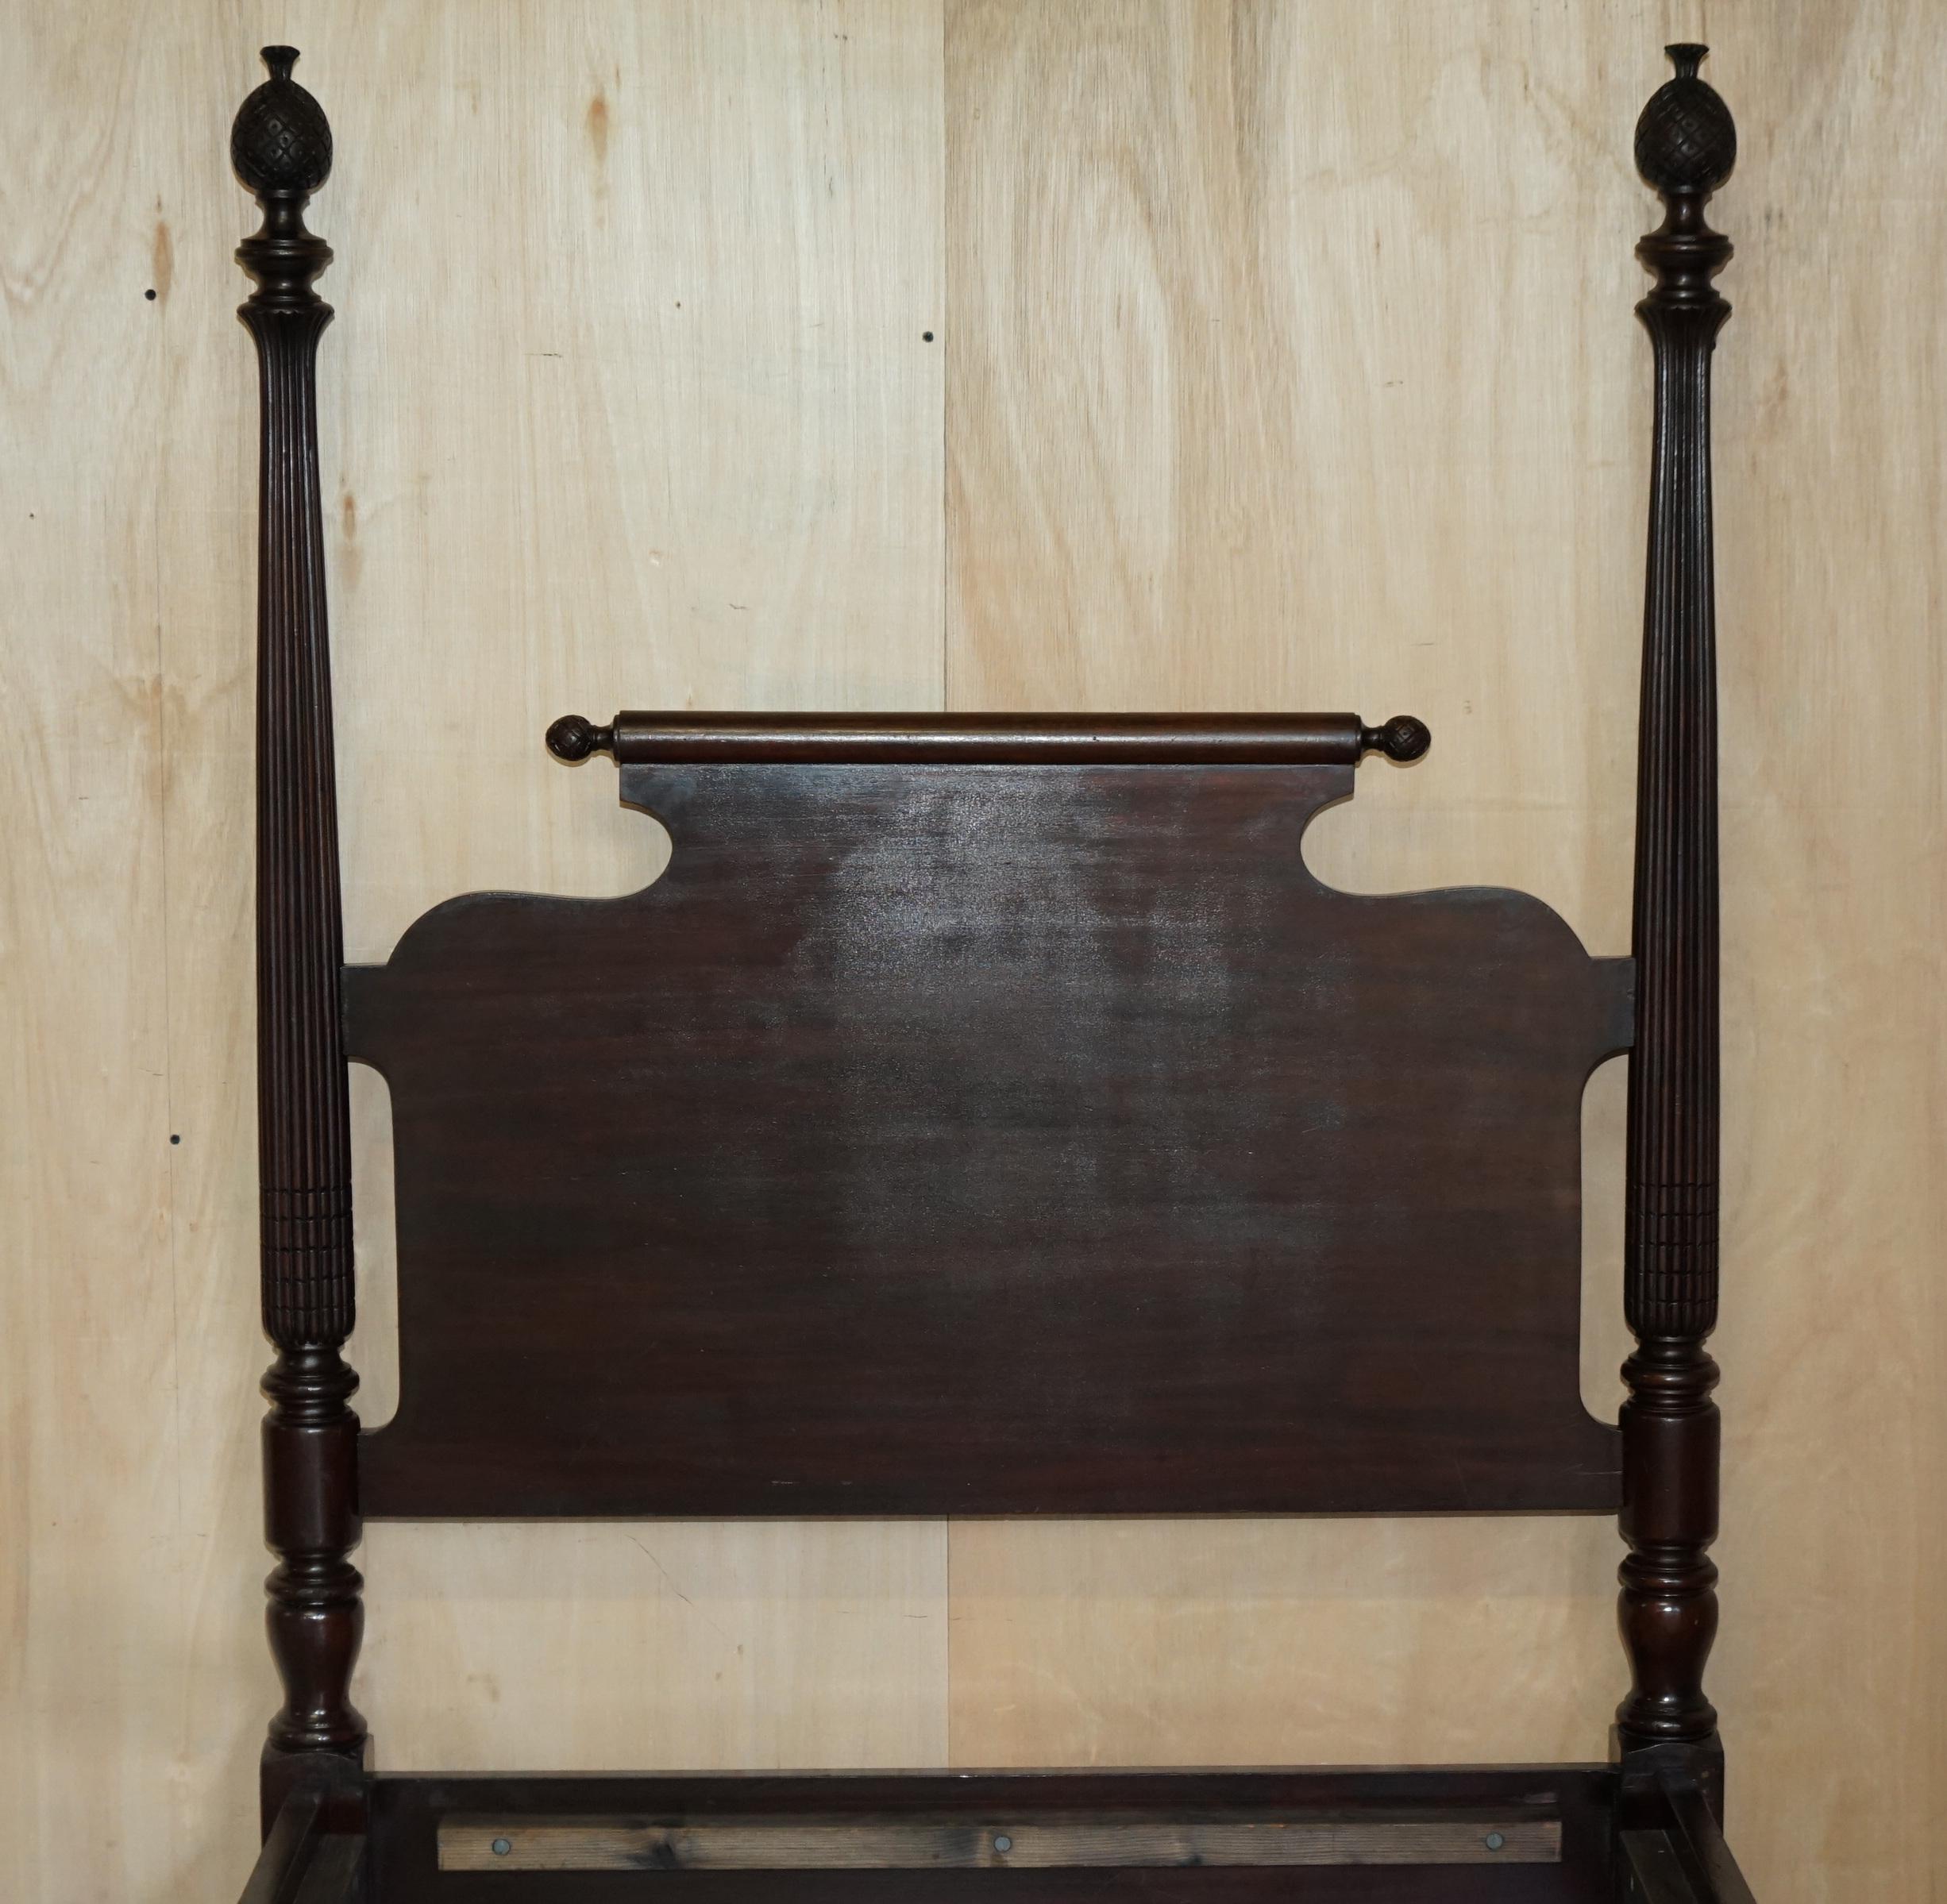 Circa 1800 American Federal Hardwood Four Poster Bed Frame with Carved Pillars For Sale 2